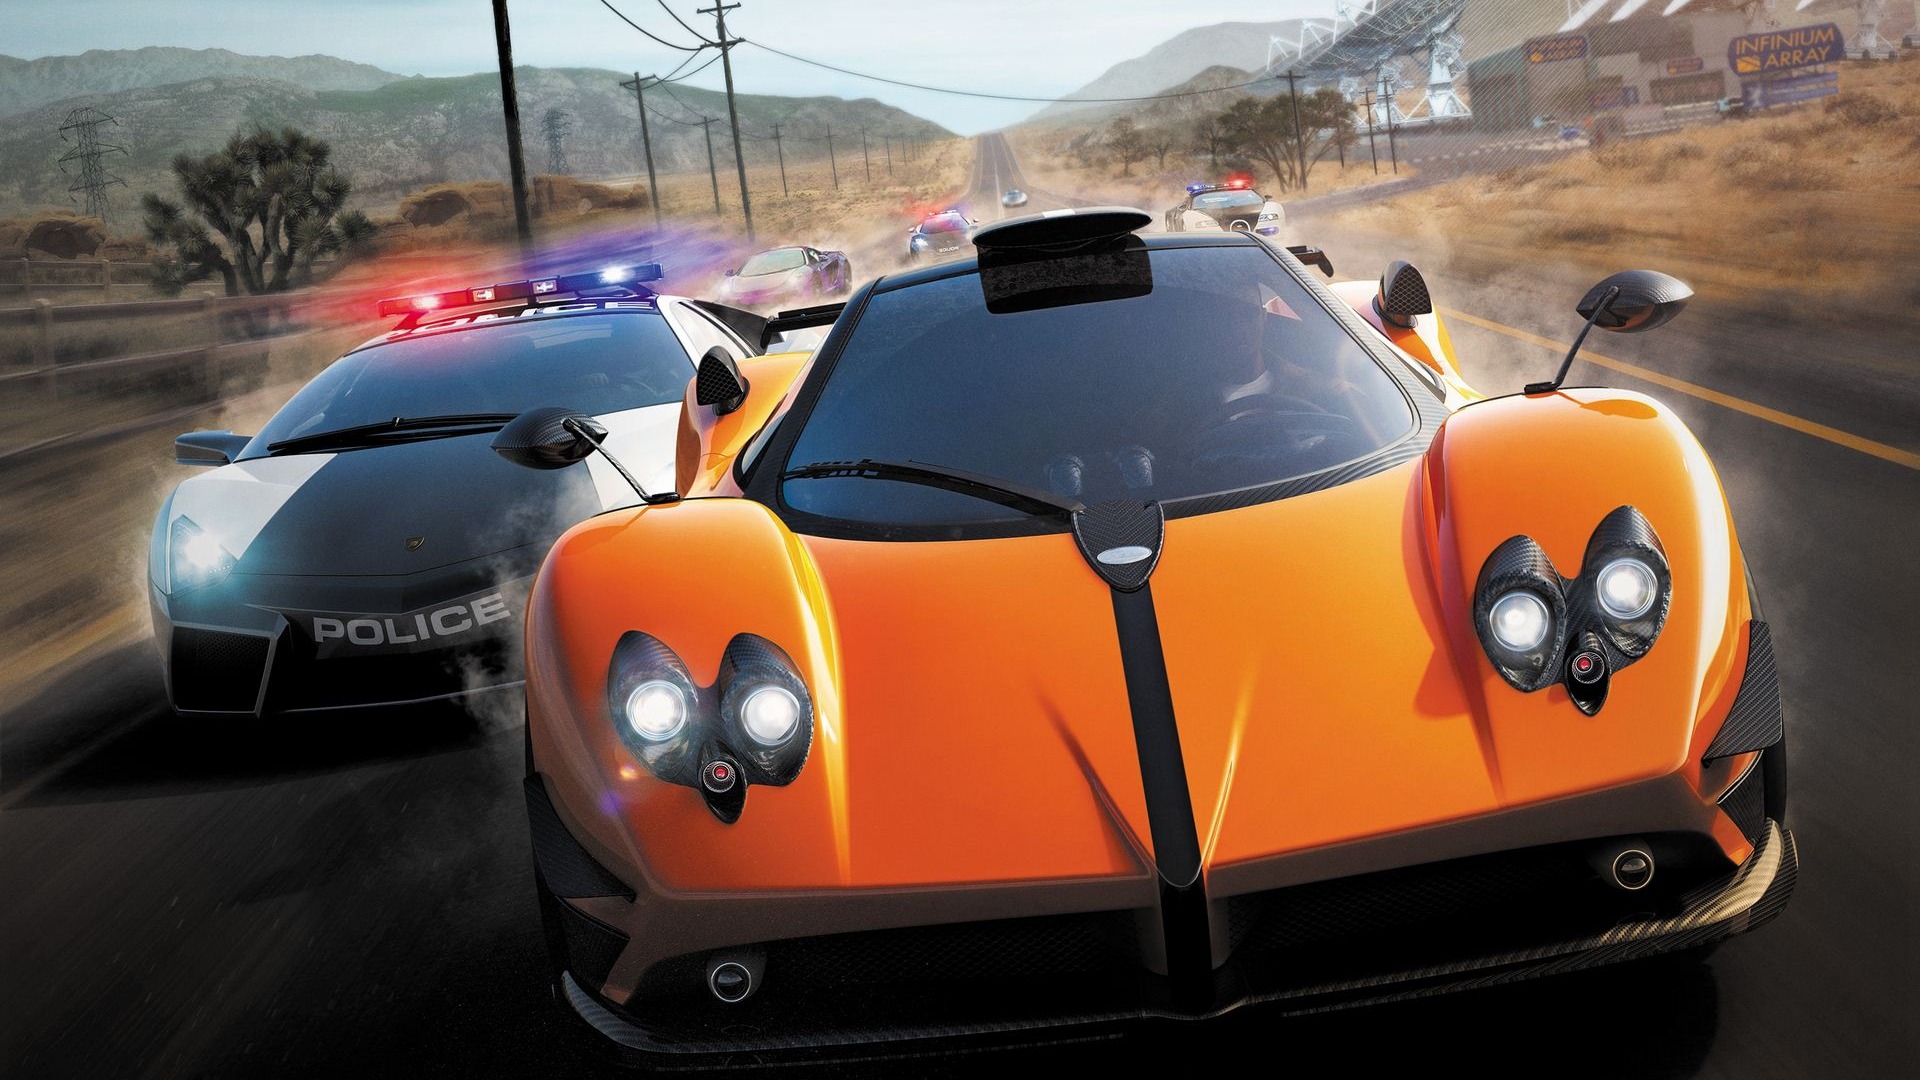 Need for Speed: Hot Pursuit 極品飛車14：熱力追踪 #2 - 1920x1080